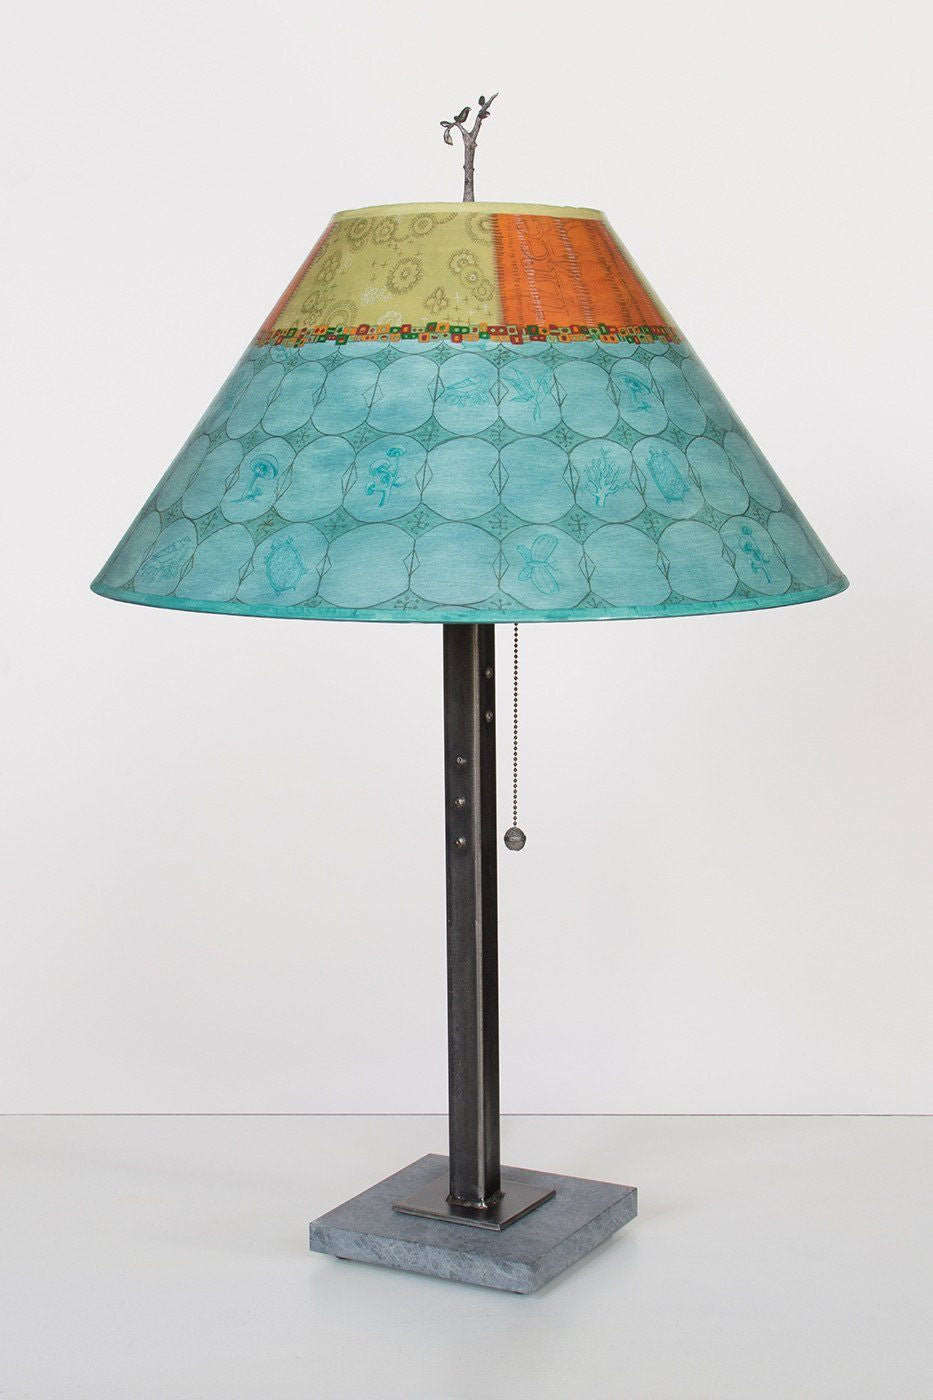 Steel Table Lamp on Italian Marble with Large Conical Shade in Paradise Pool